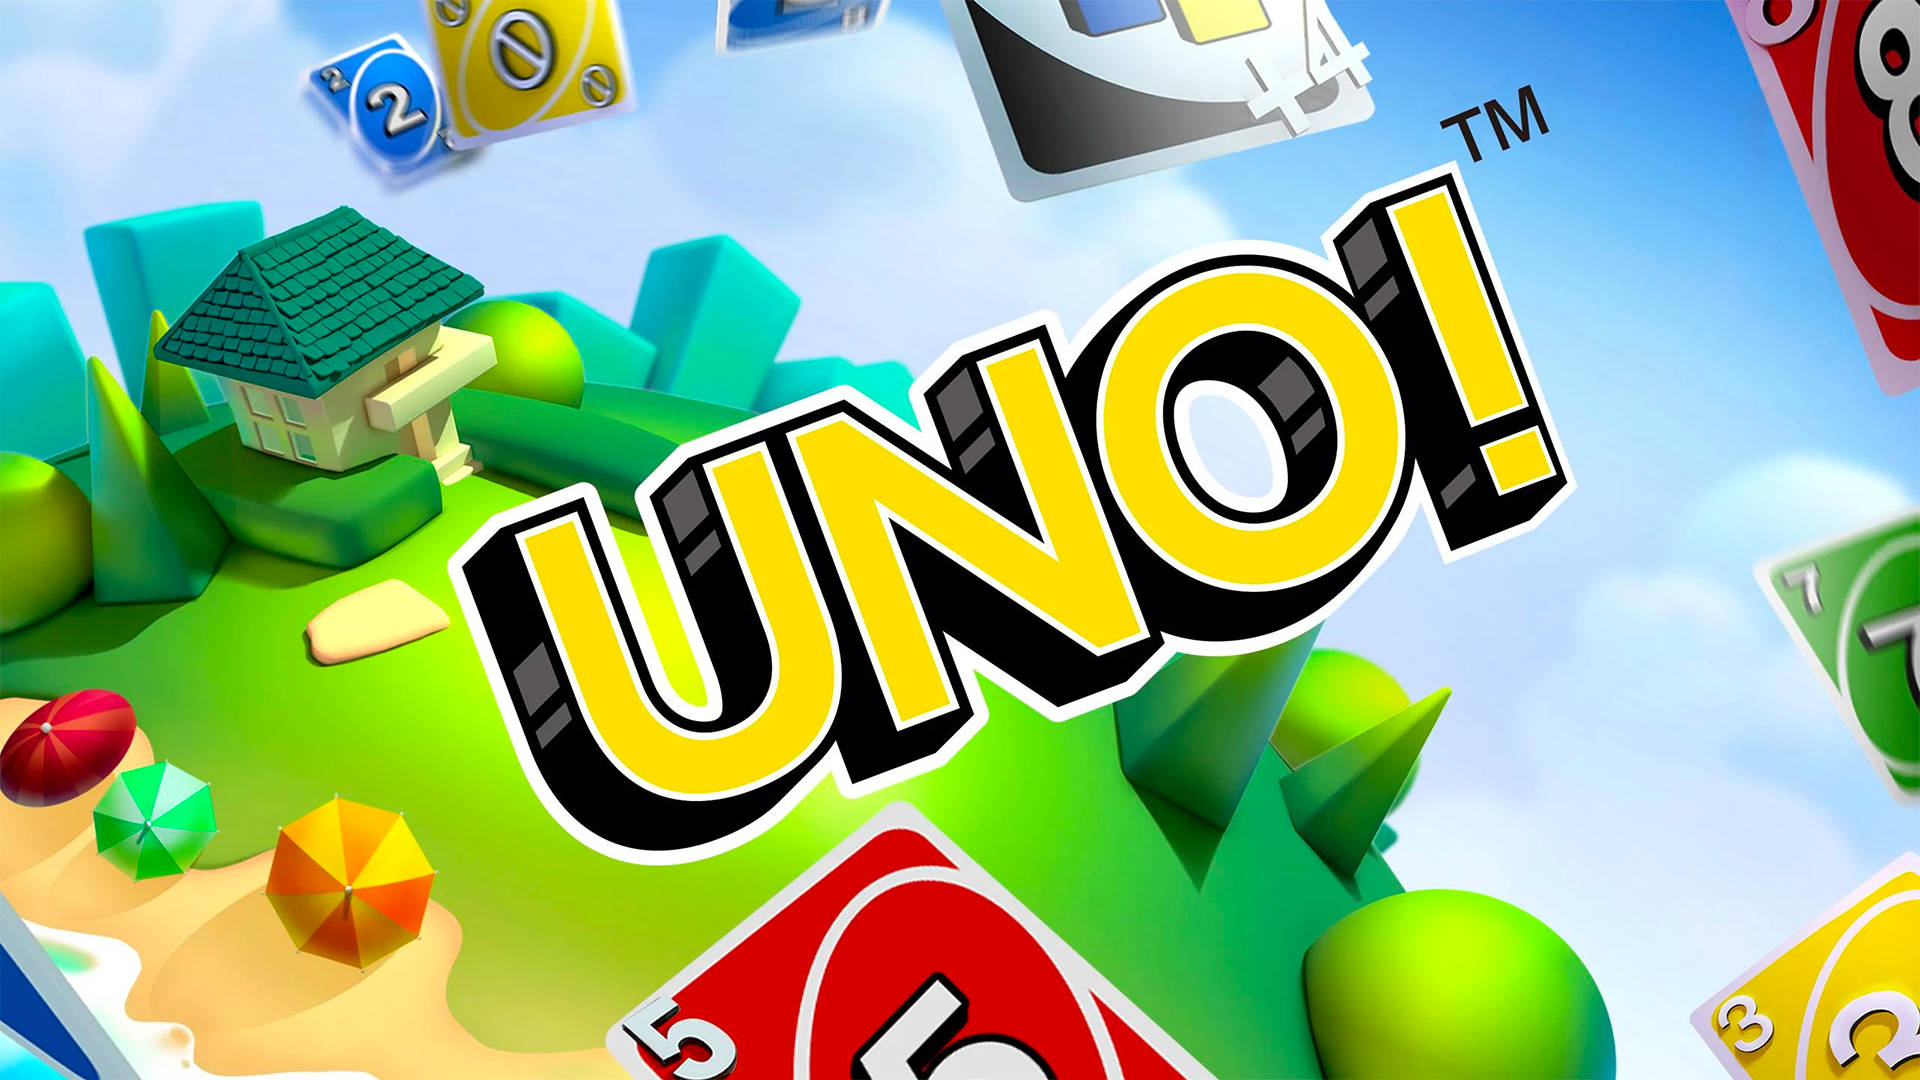 An exciting play in Uno - colorful Uno card deck spread out on a table Wallpaper